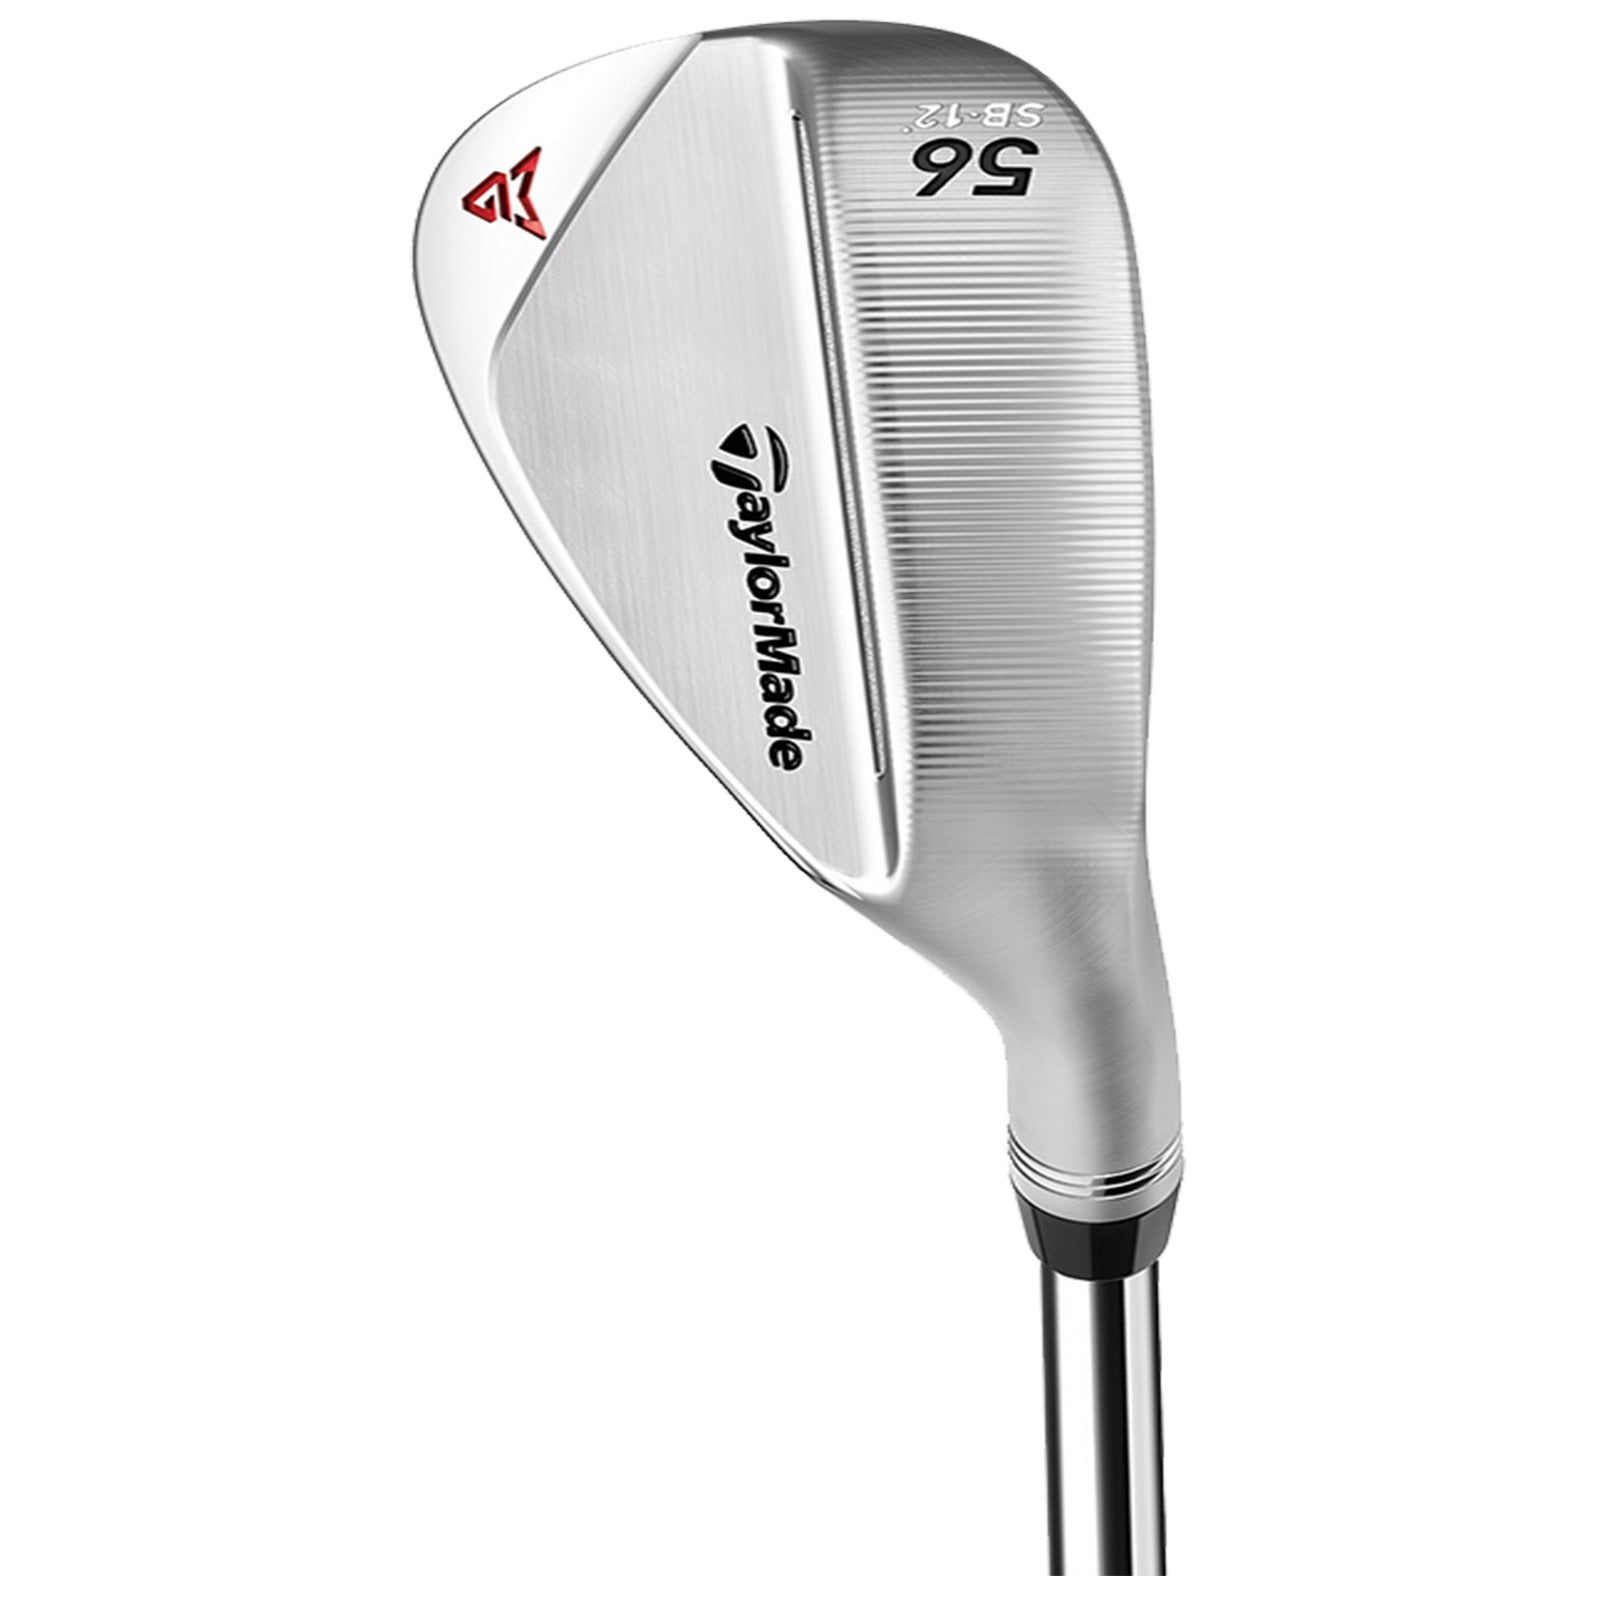 TaylorMade Mens Milled Grind 2 Chrome Wedge